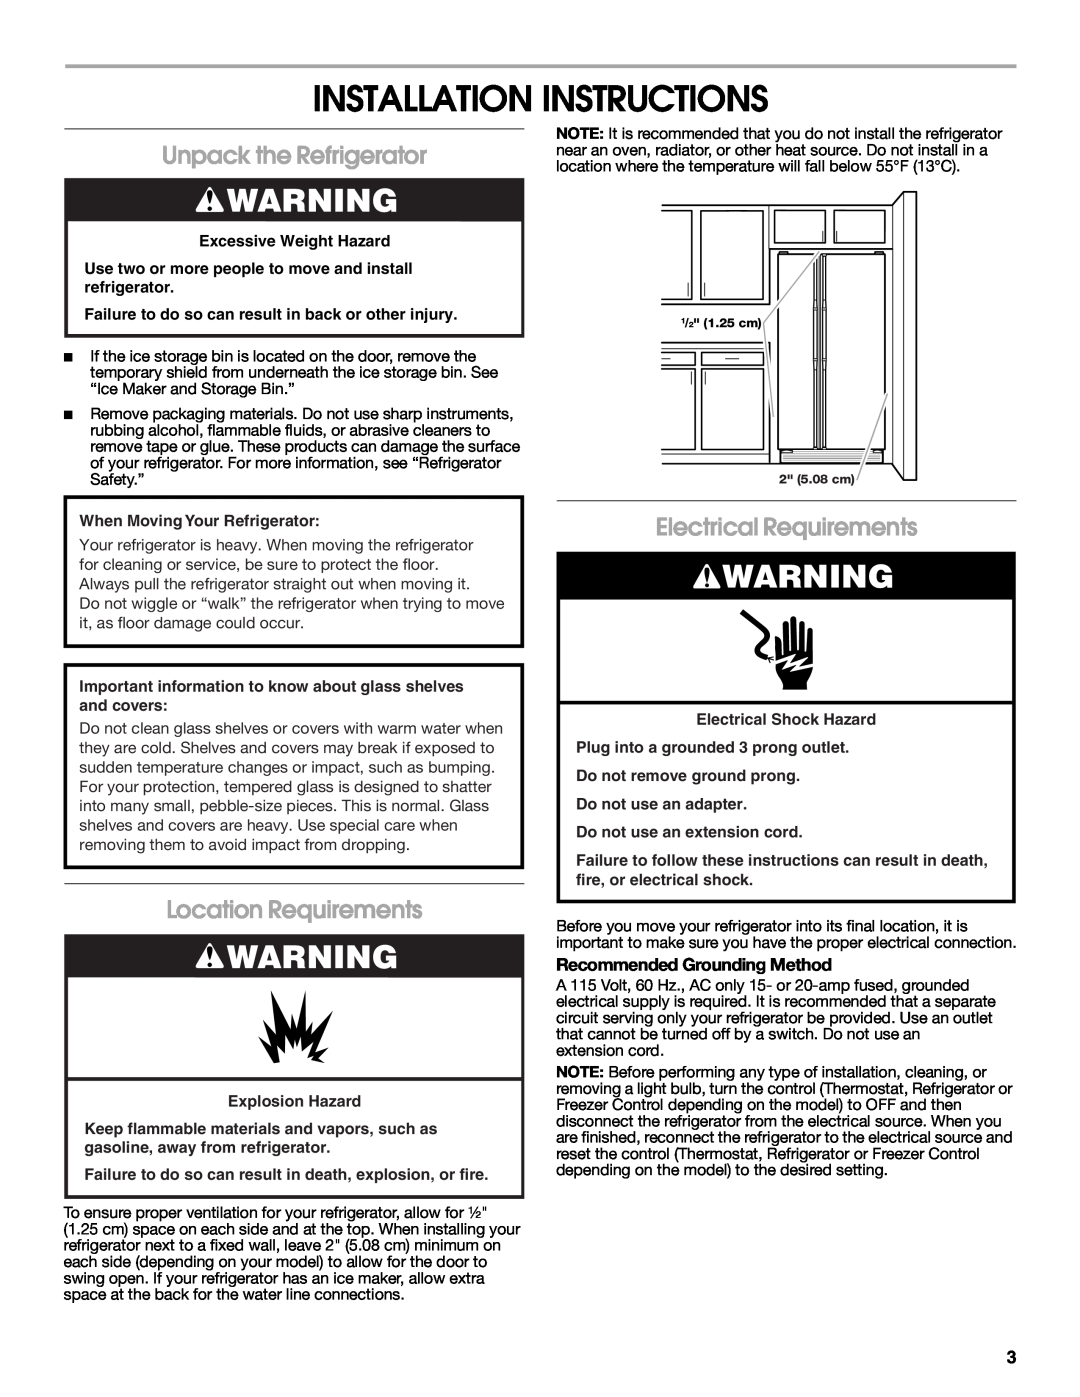 Whirlpool RS22AQXMQ01 Installation Instructions, Unpack the Refrigerator, Location Requirements, Electrical Requirements 